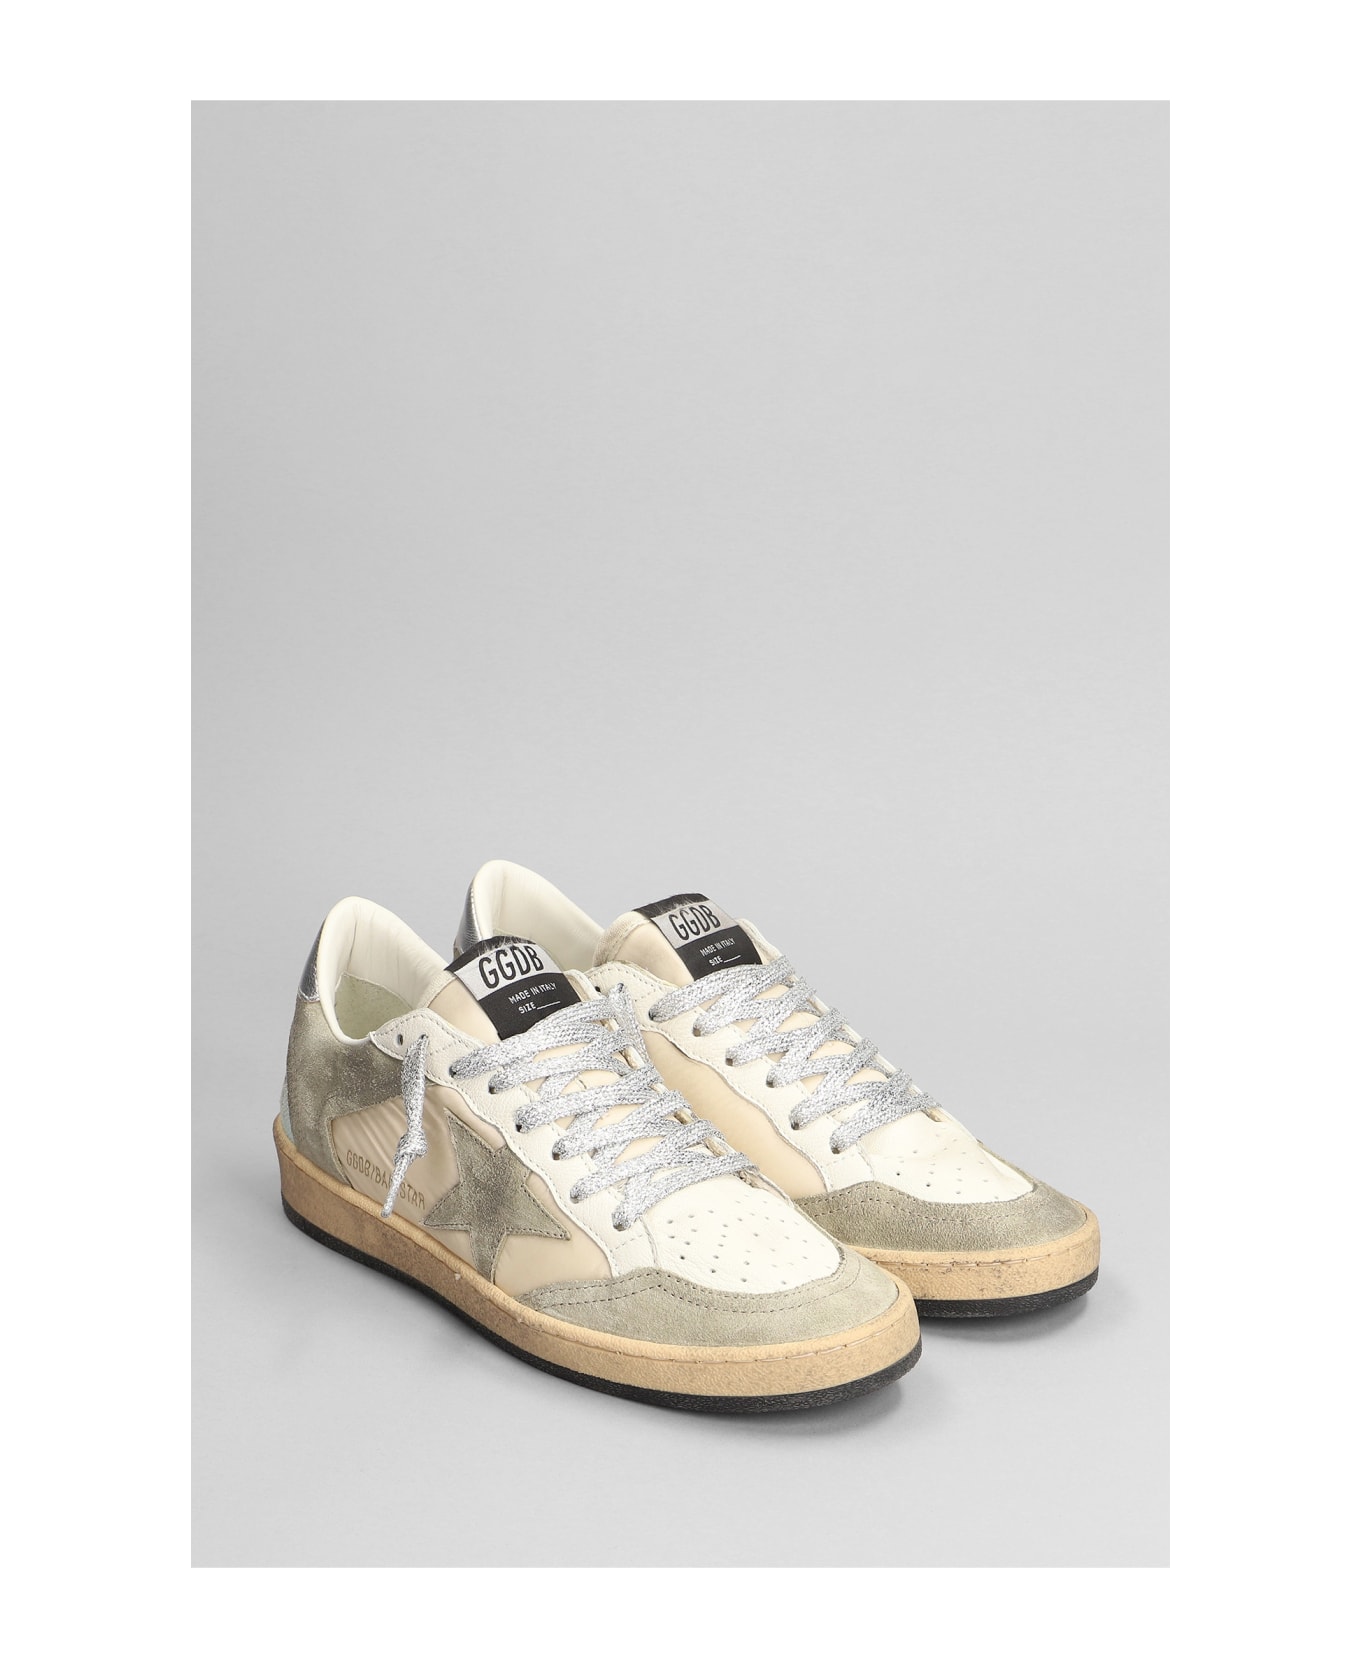 Golden Goose Ball Star Sneakers In Beige Leather And Fabric - beige スニーカー